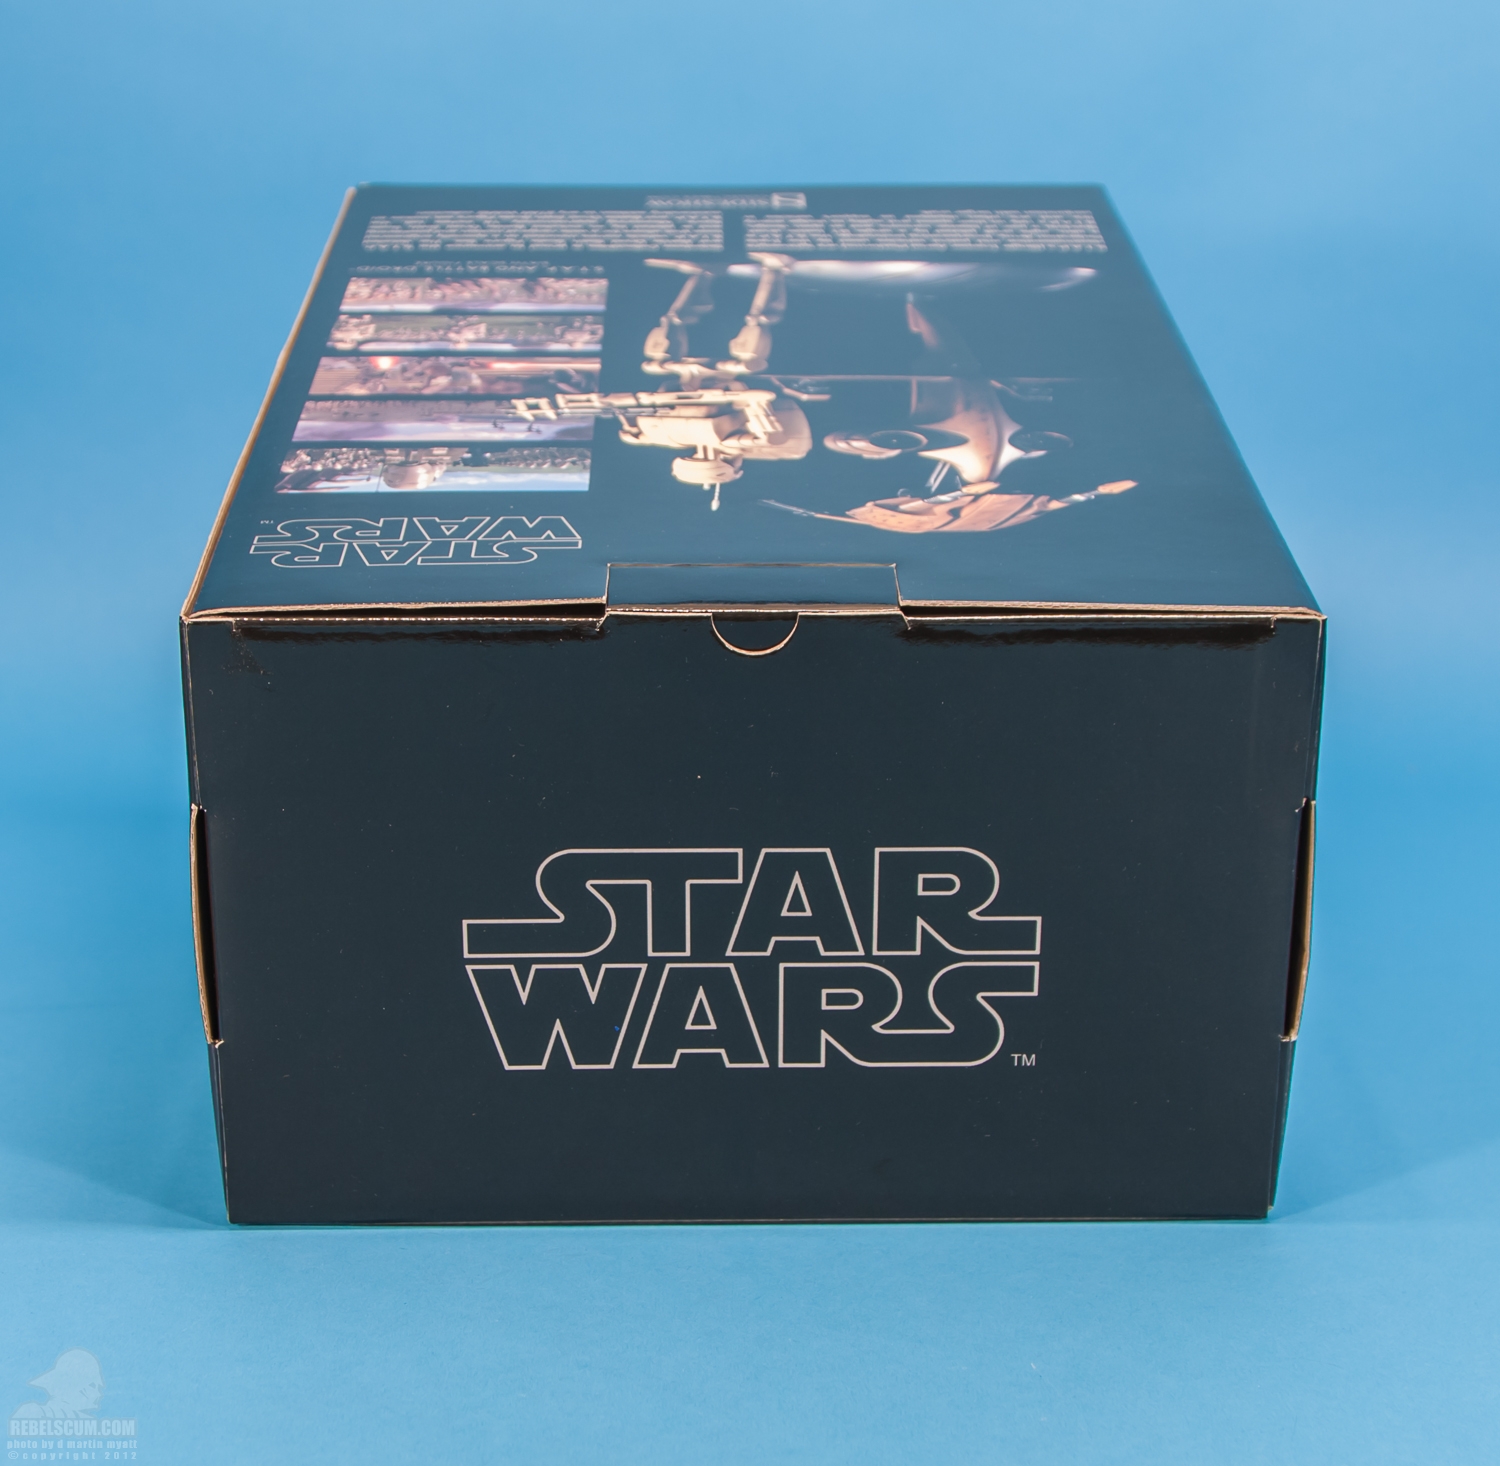 STAP_Battle_Droid_Star_Wars_Sideshow_Collectibles-45.jpg